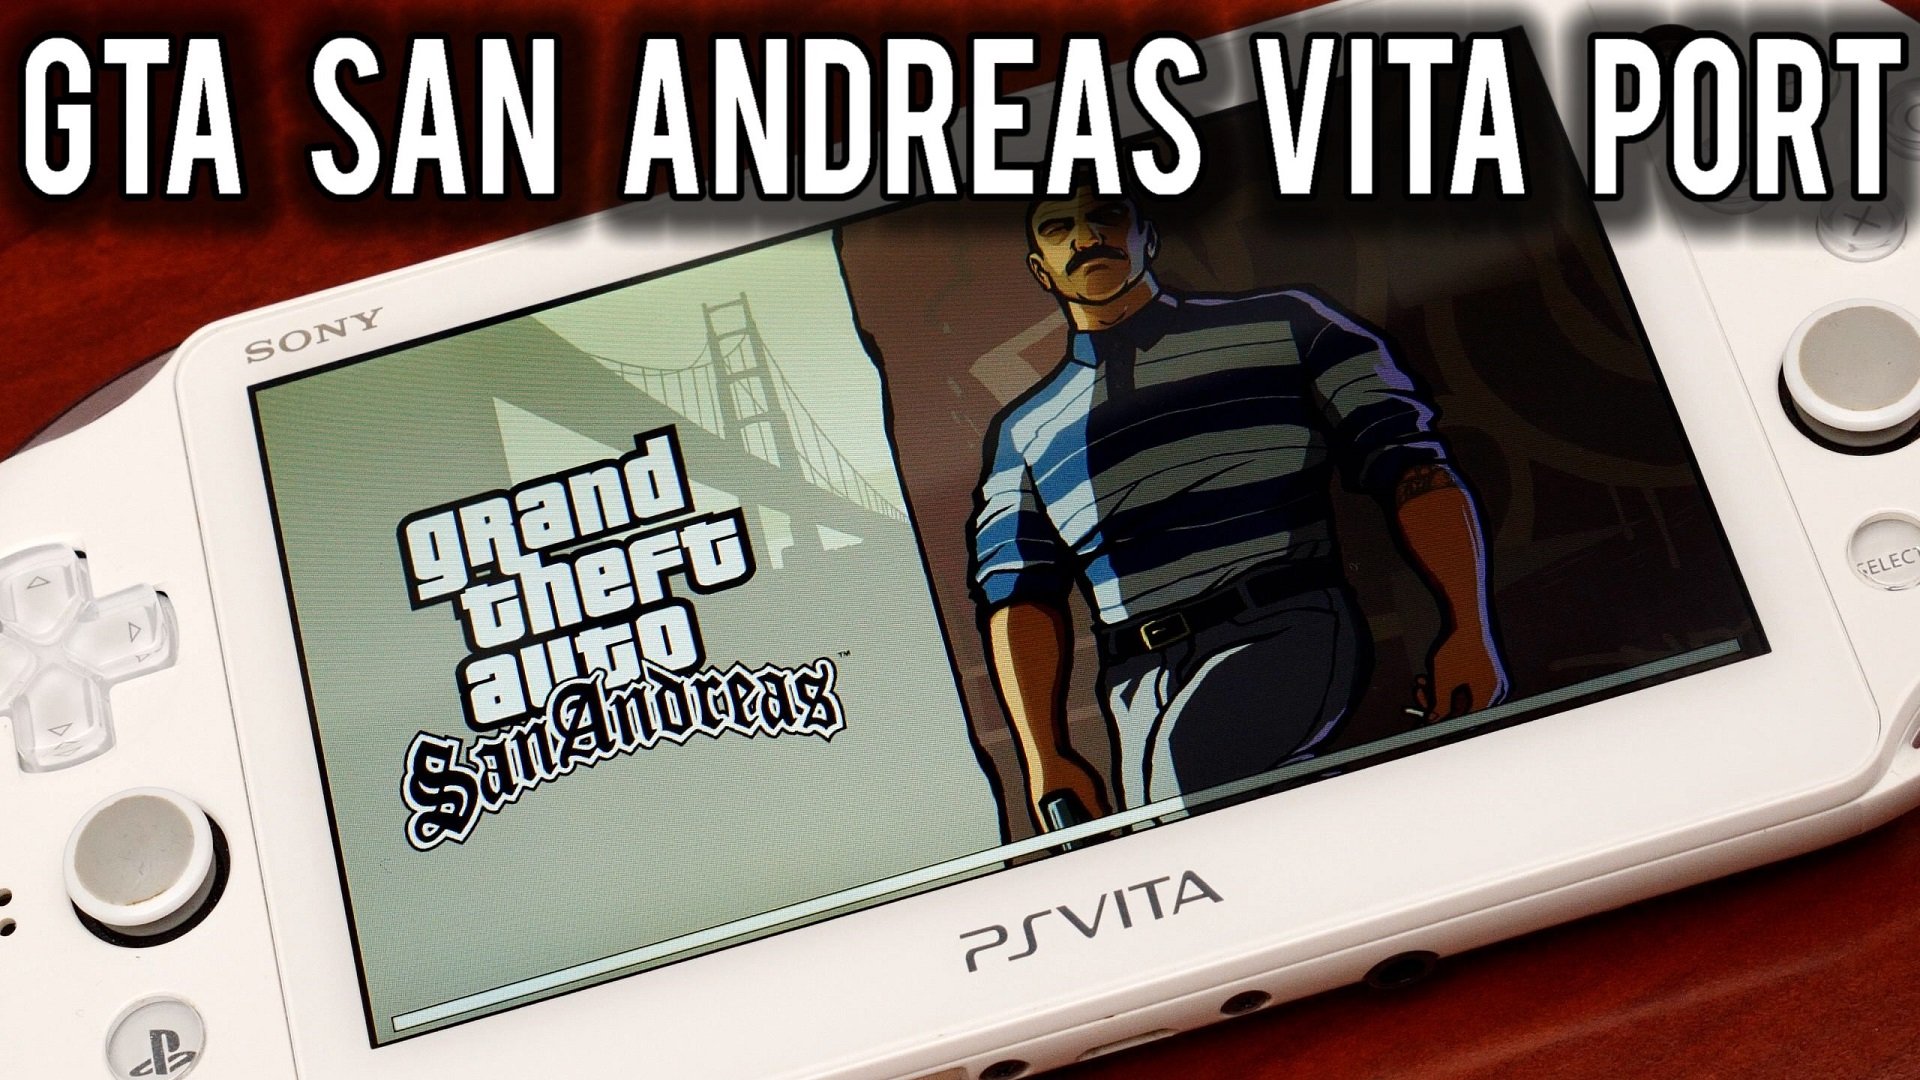 Gta San Andreas Port For Vita By The Flow Page 2 Gbatemp Net The Independent Video Game Community